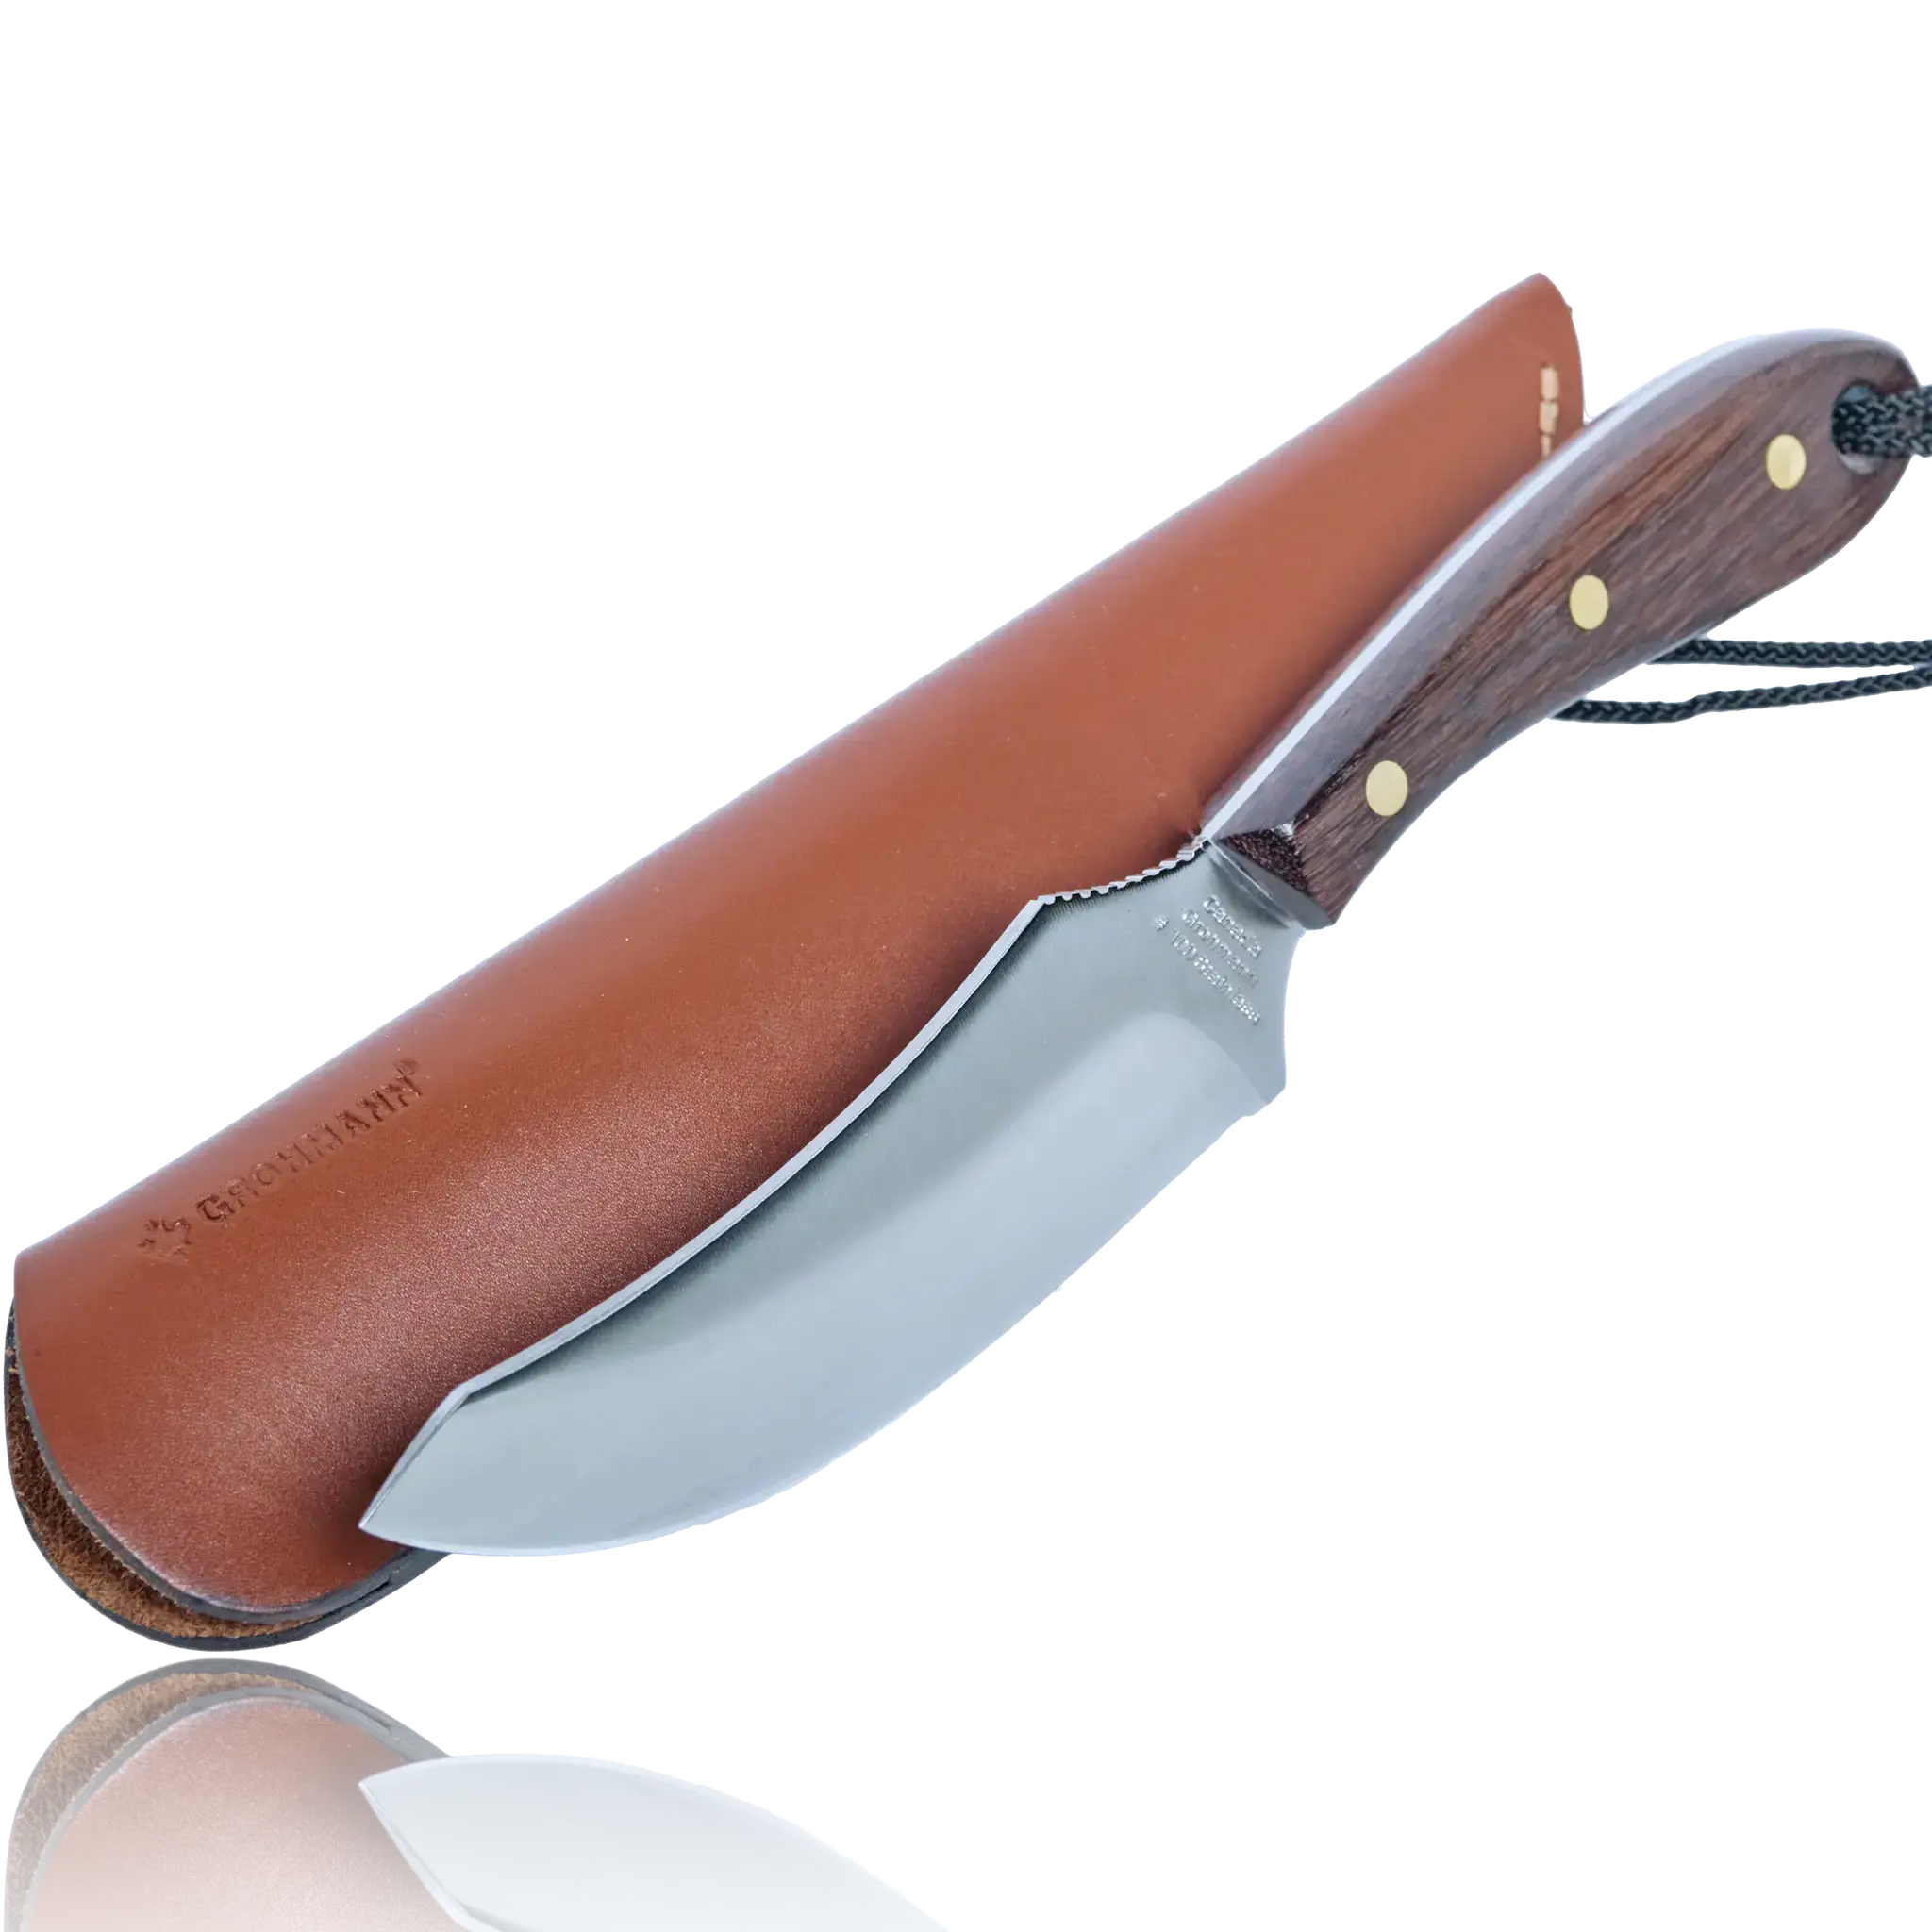 Large Skinner-1977 Design Award, with Leather Sheath | R100S